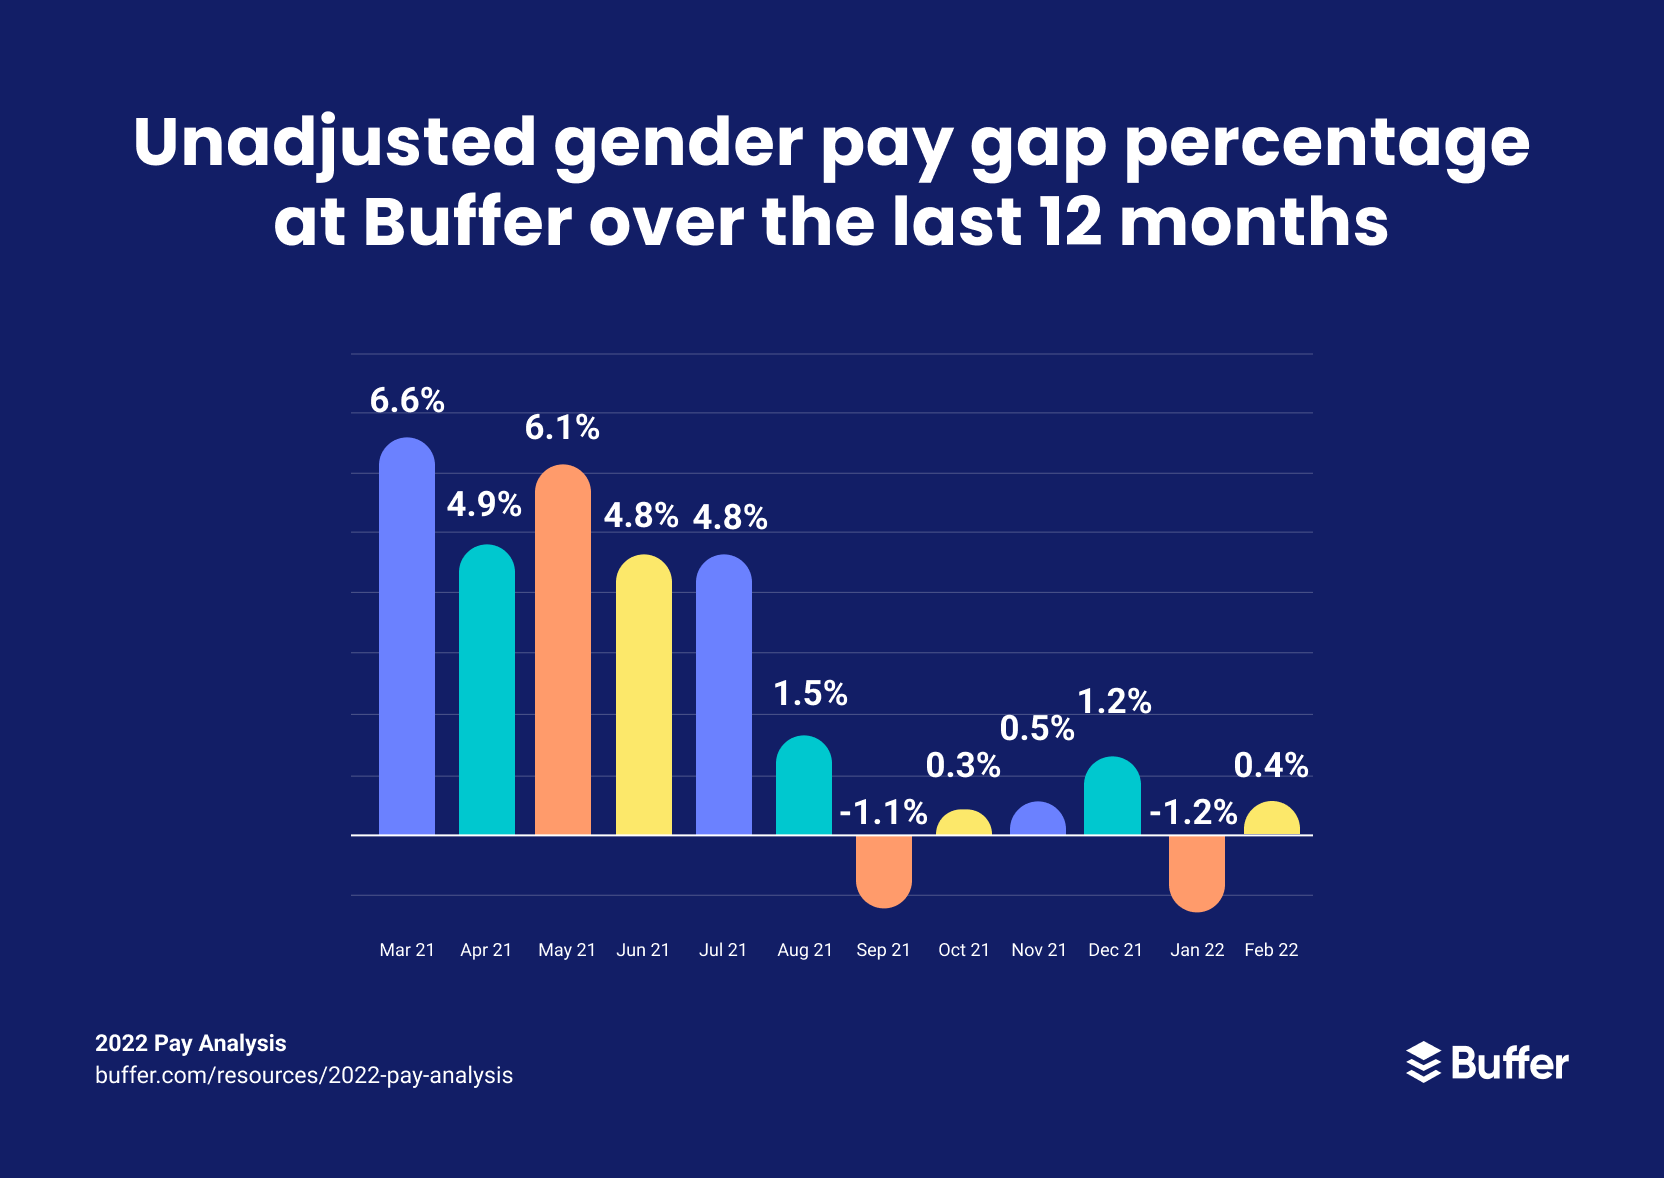 Chart showing the unadjusted gender pay page percentage at Buffer over the last 12 months